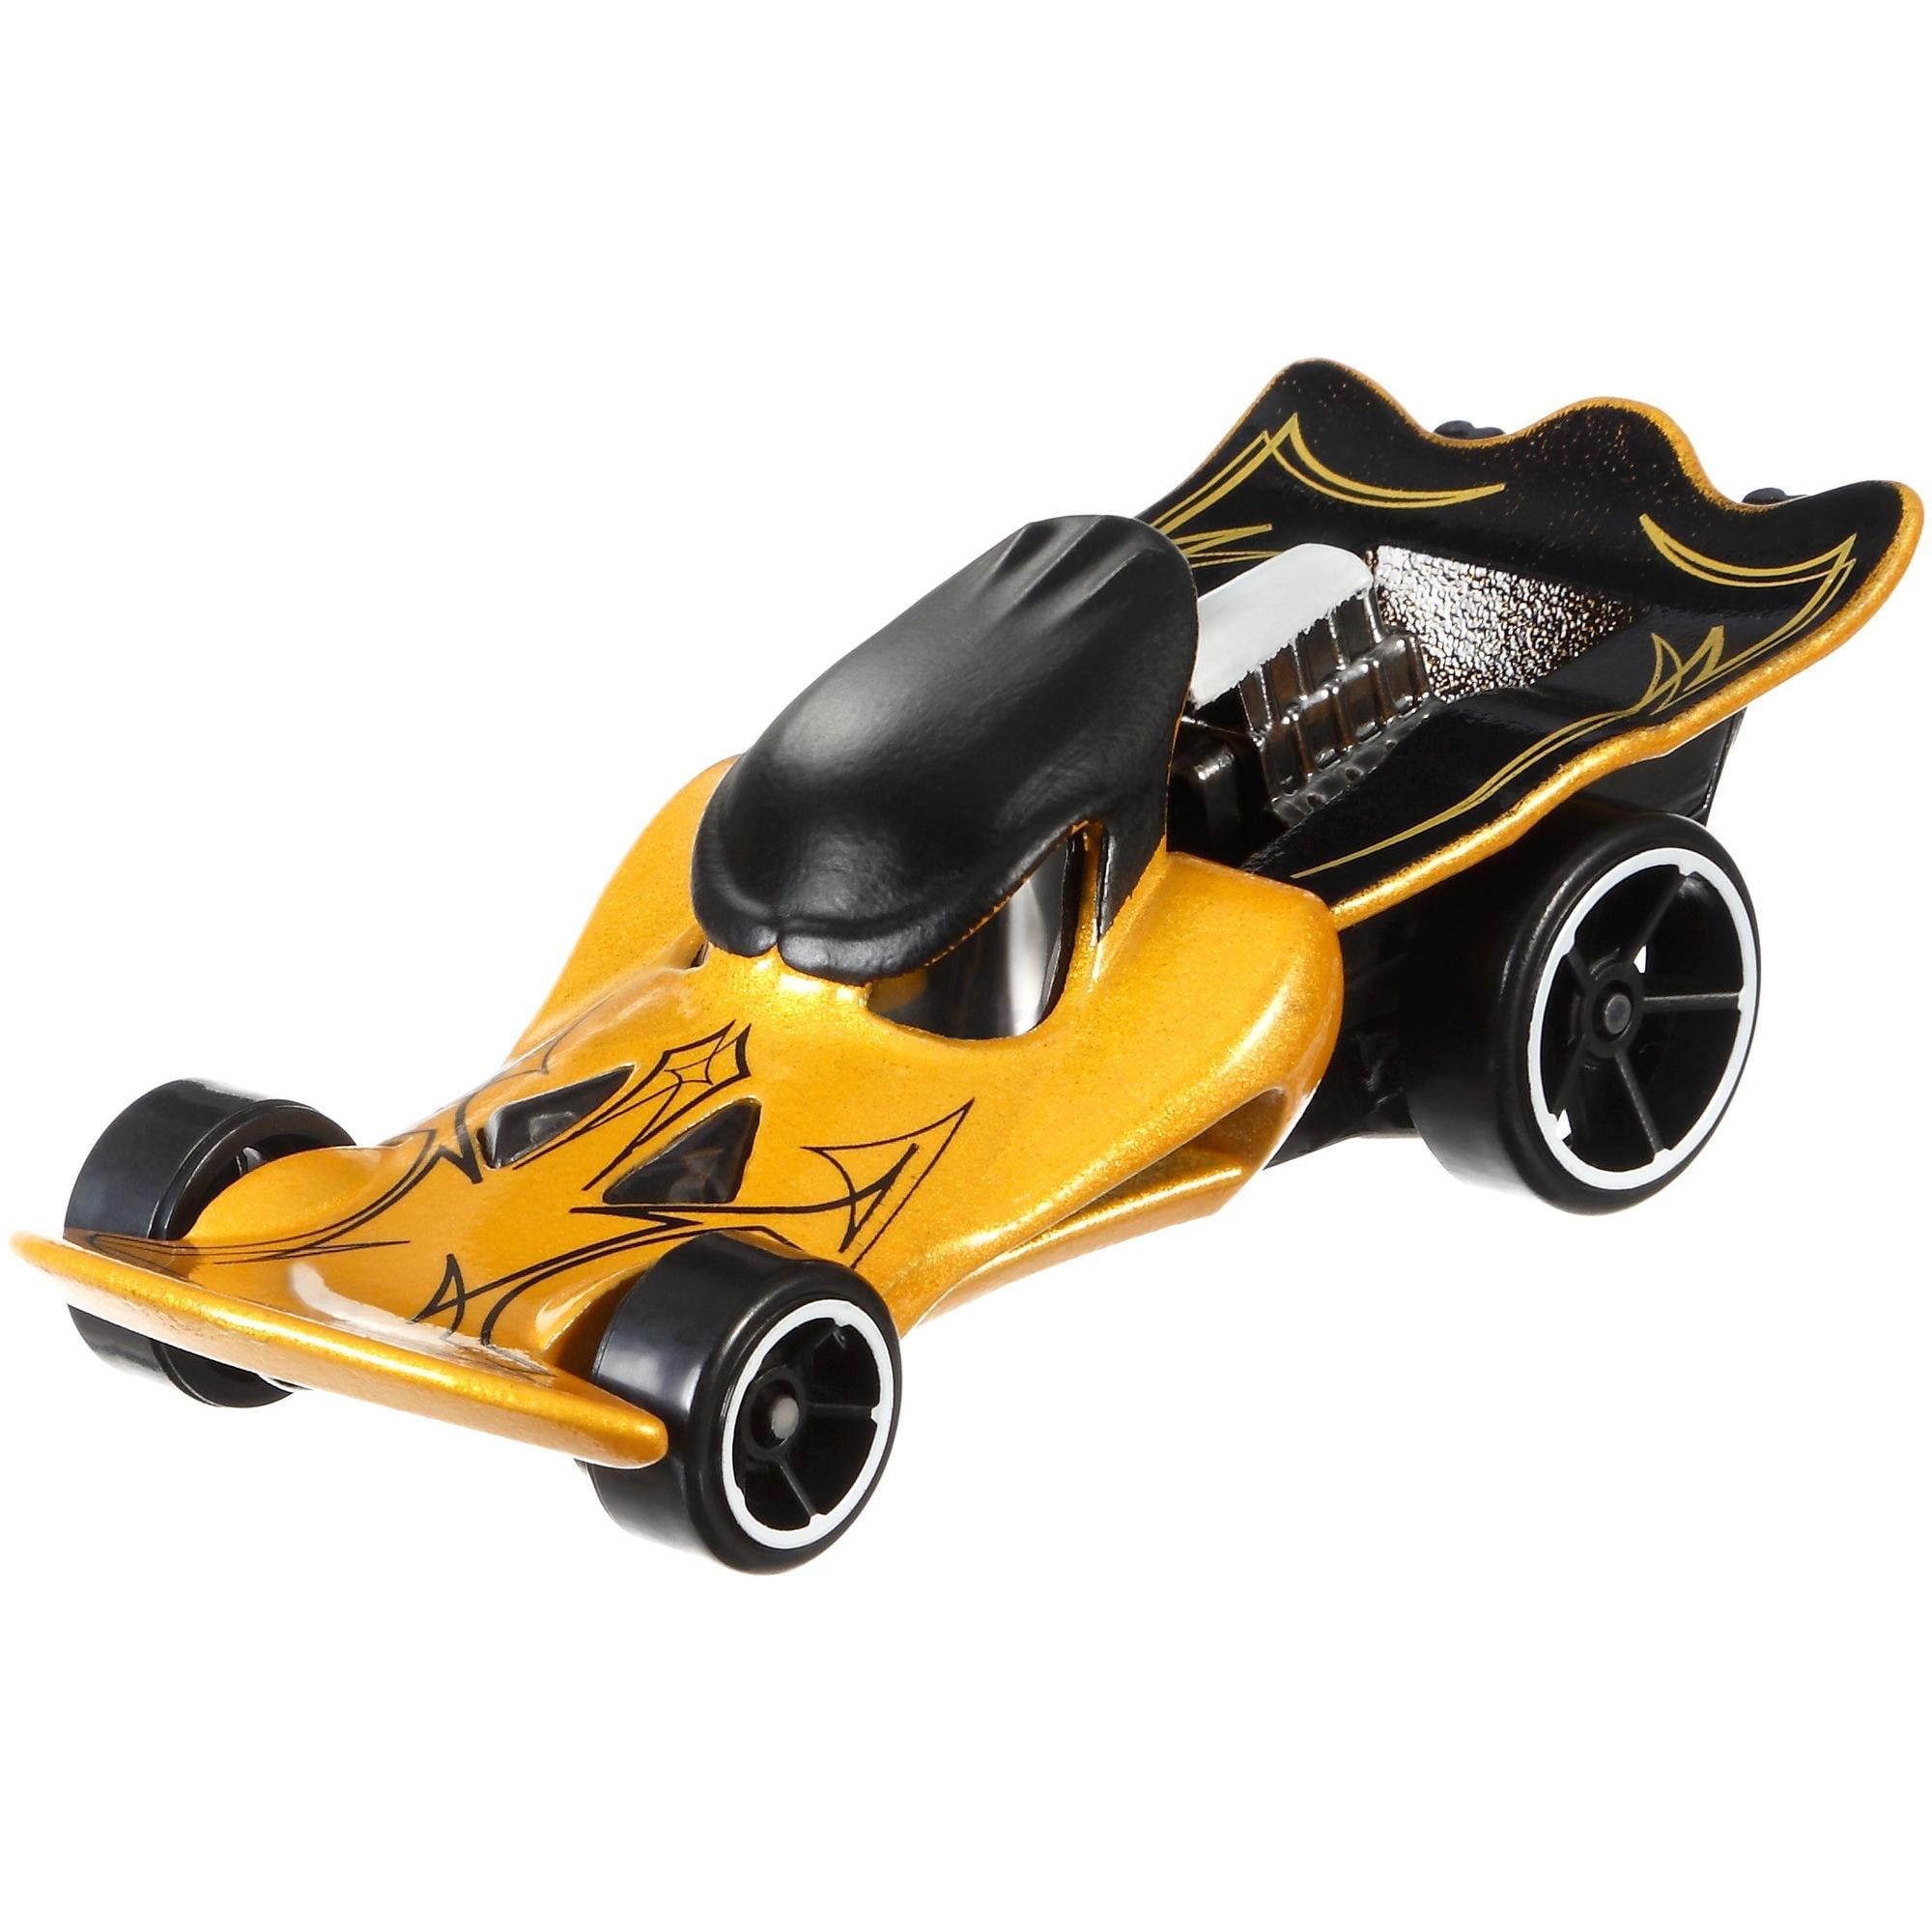 Details about / Hot Wheels 2016 LOONEY TUNES DAFFY DUCK Character Car.